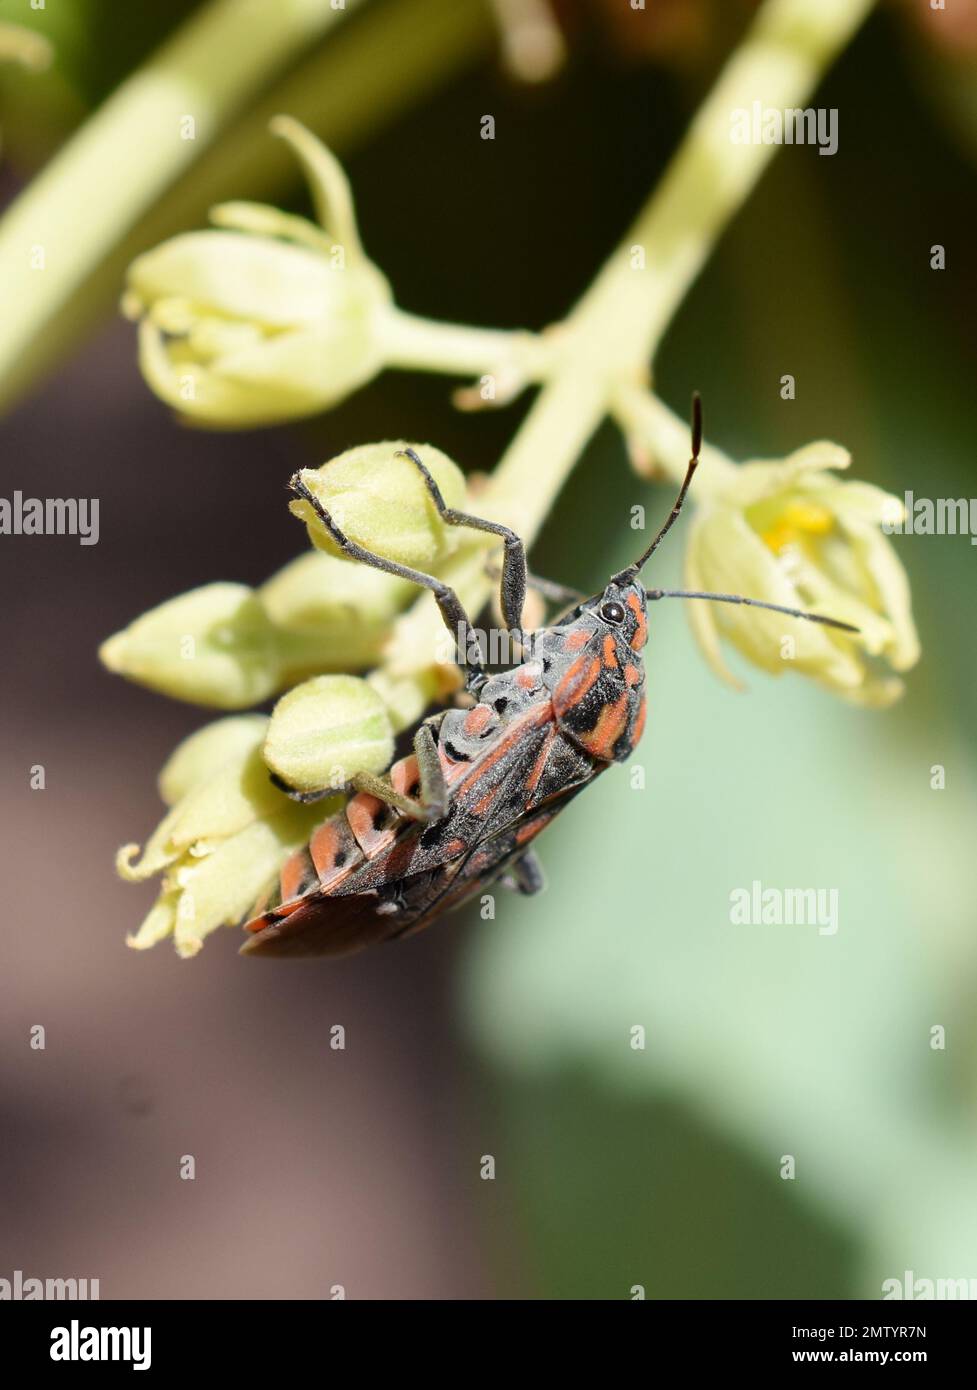 Black and red seed bug Spilostethus pandurus sitting on a flower bud Stock Photo